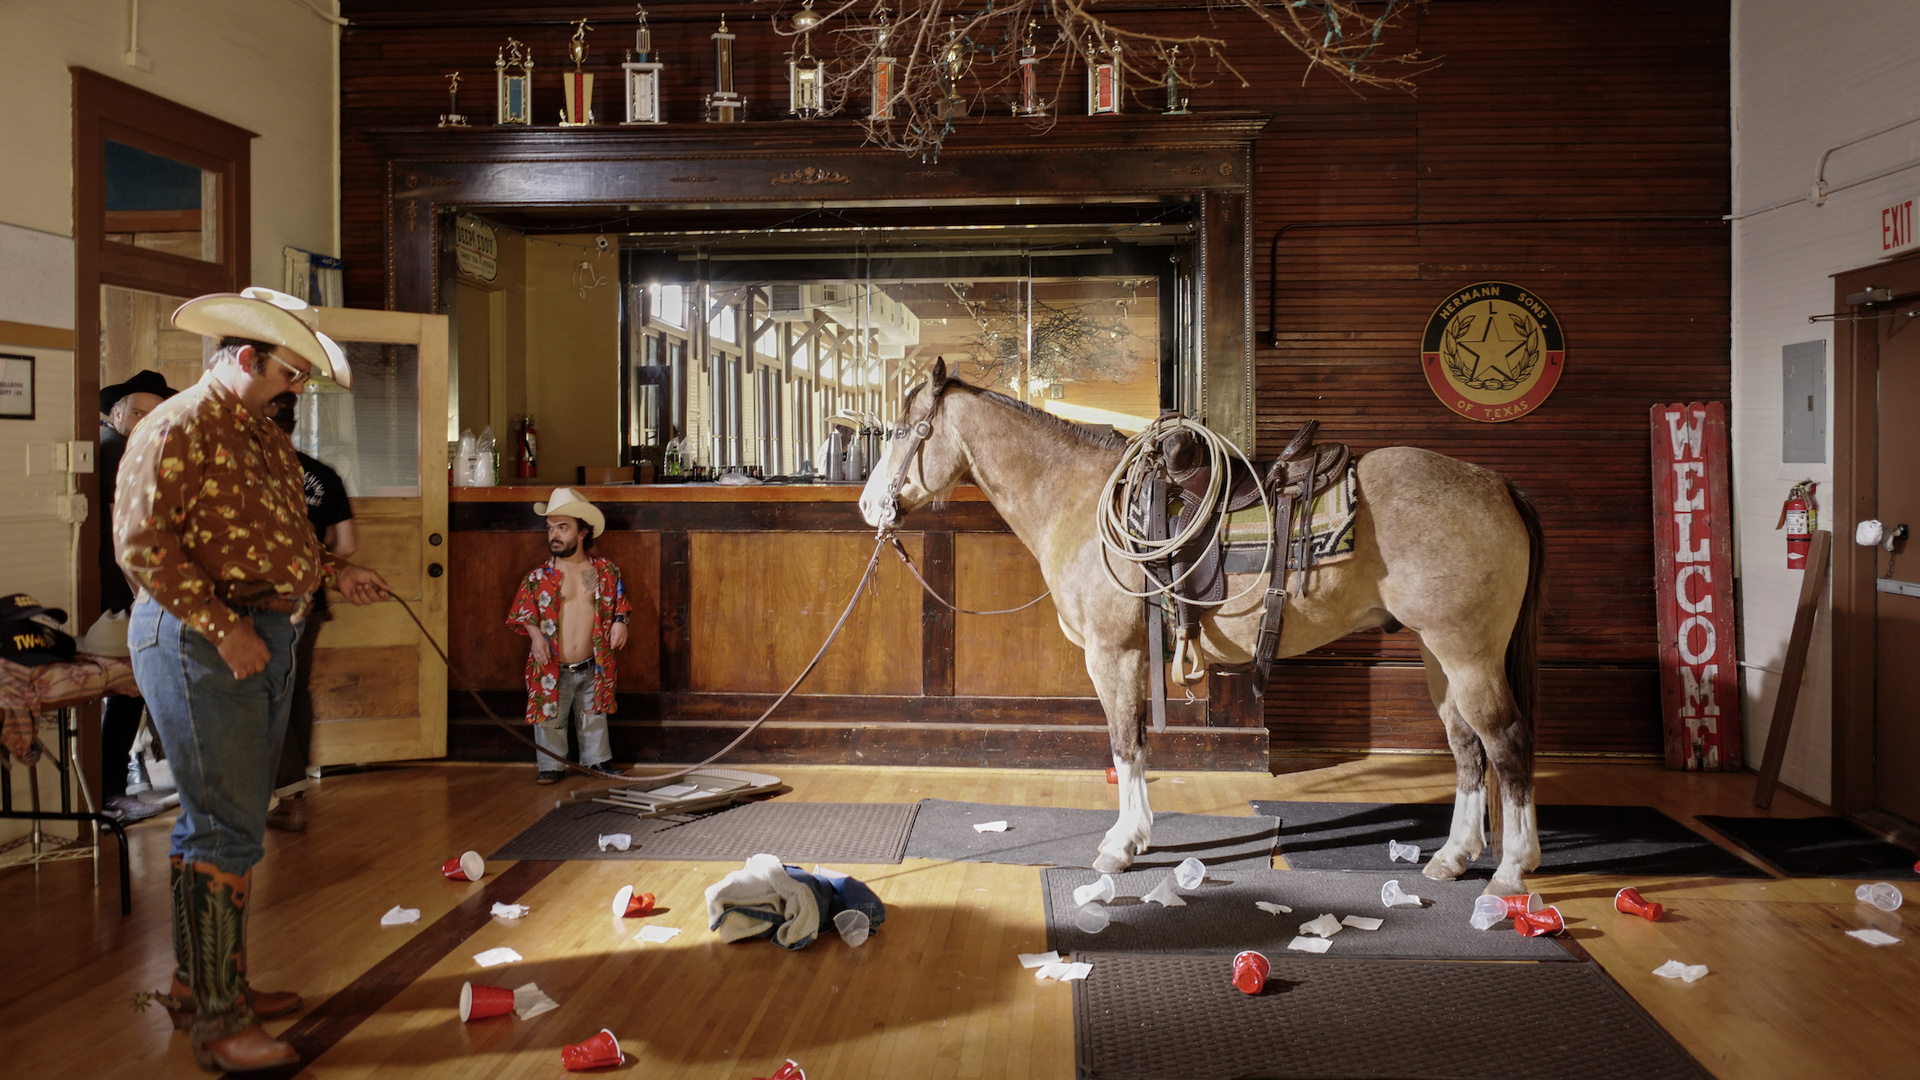 A horse, some cowboys, and many plastic cups in a bar